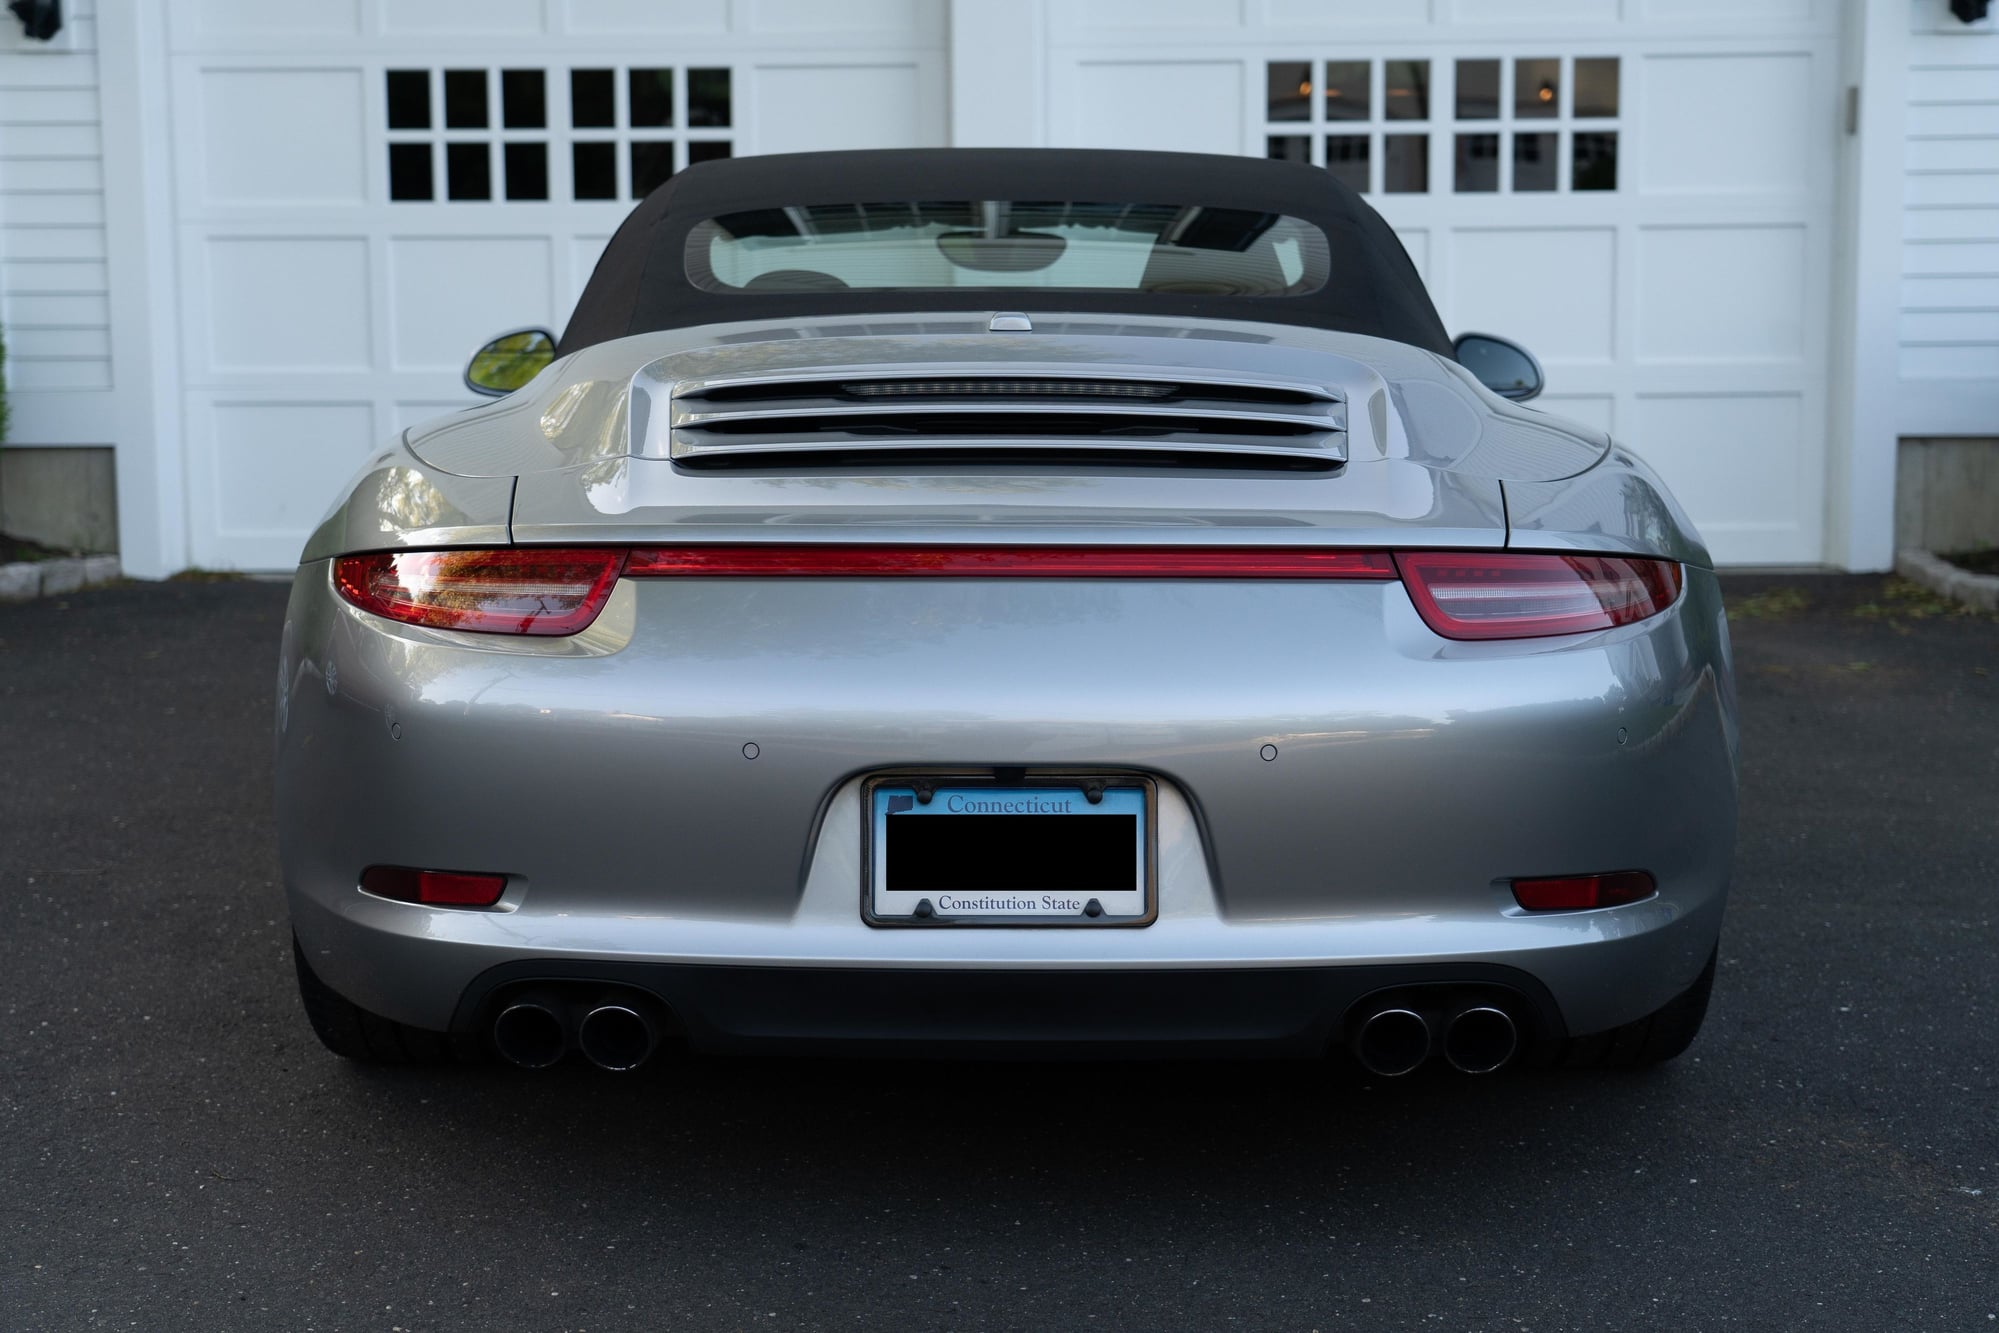 2015 Porsche 911 - 2015 911 Carerra 4S Cabriolet - Used - VIN WP0CB2A95FS154765 - 24,802 Miles - 3 cyl - 2WD - Automatic - Convertible - Silver - New Canaan, CT 06840, United States